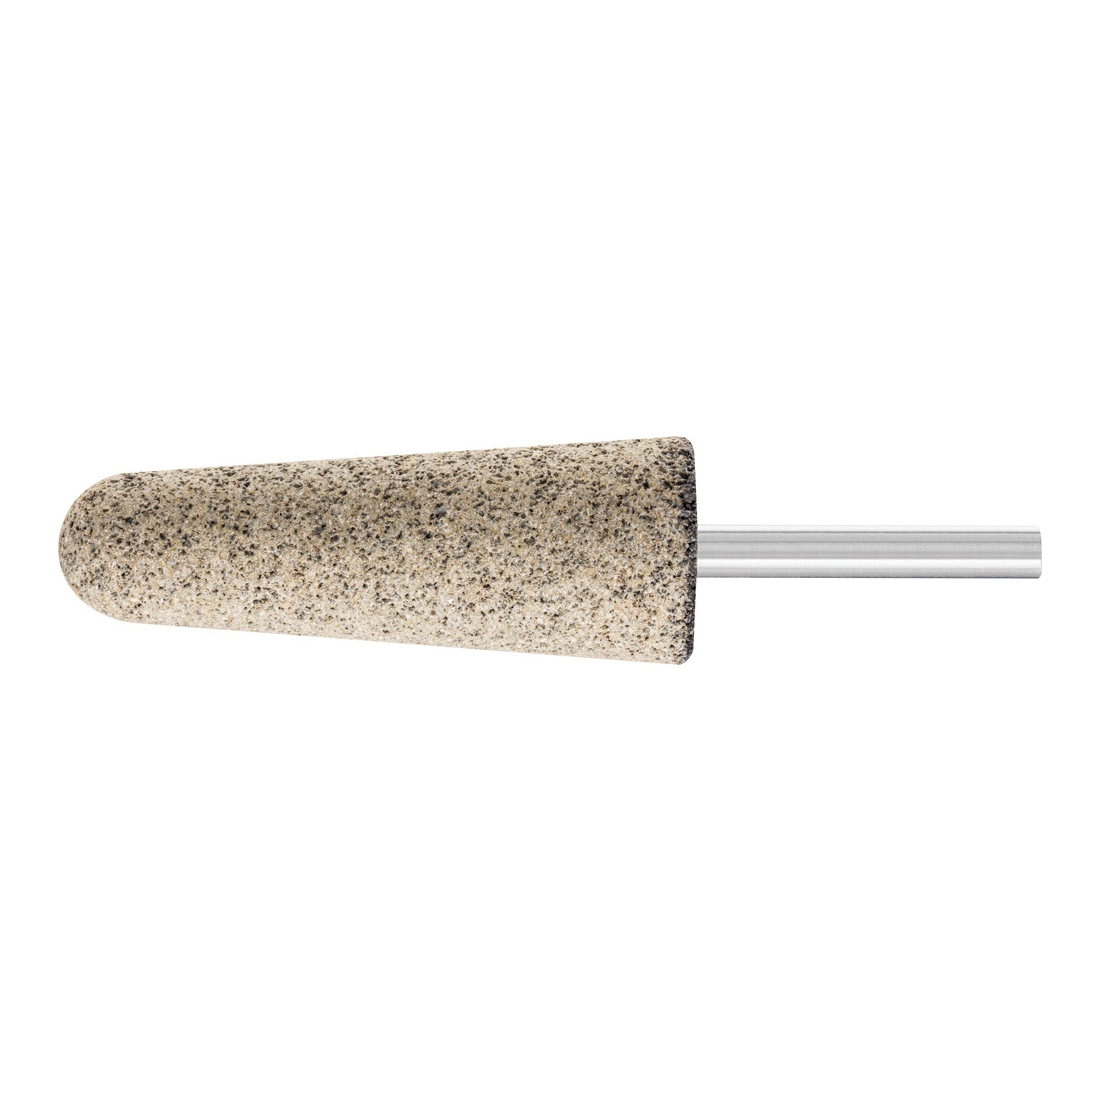 PFERD 35105 A Series Mounted Point, A3 Point, 1 in Dia x 2-3/4 in L Head, 1/4 in Dia Shank